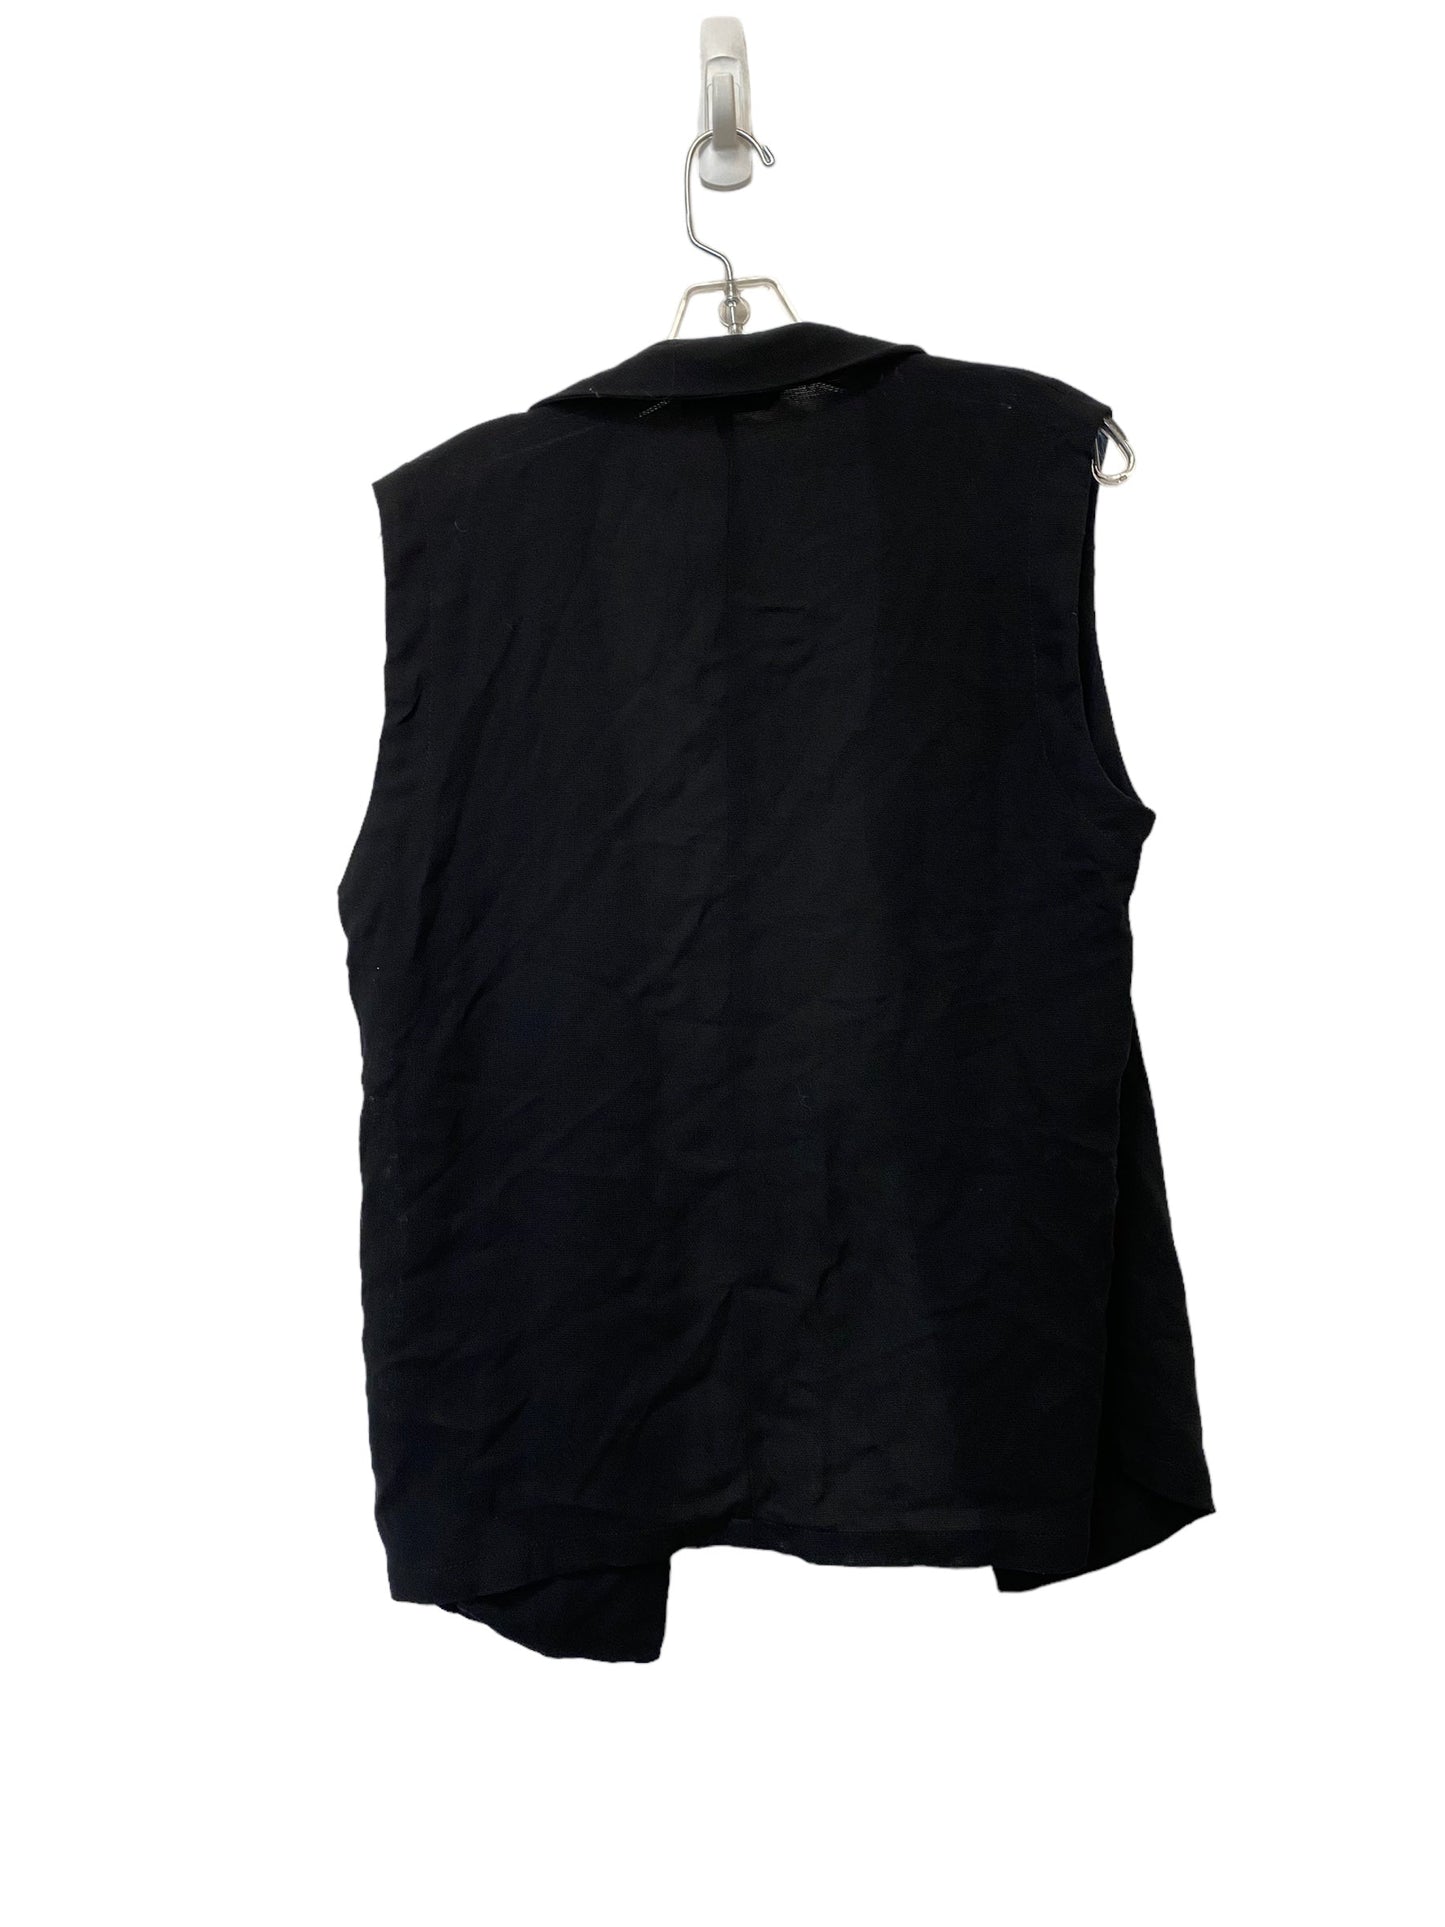 Vest Other By Clothes Mentor  Size: L